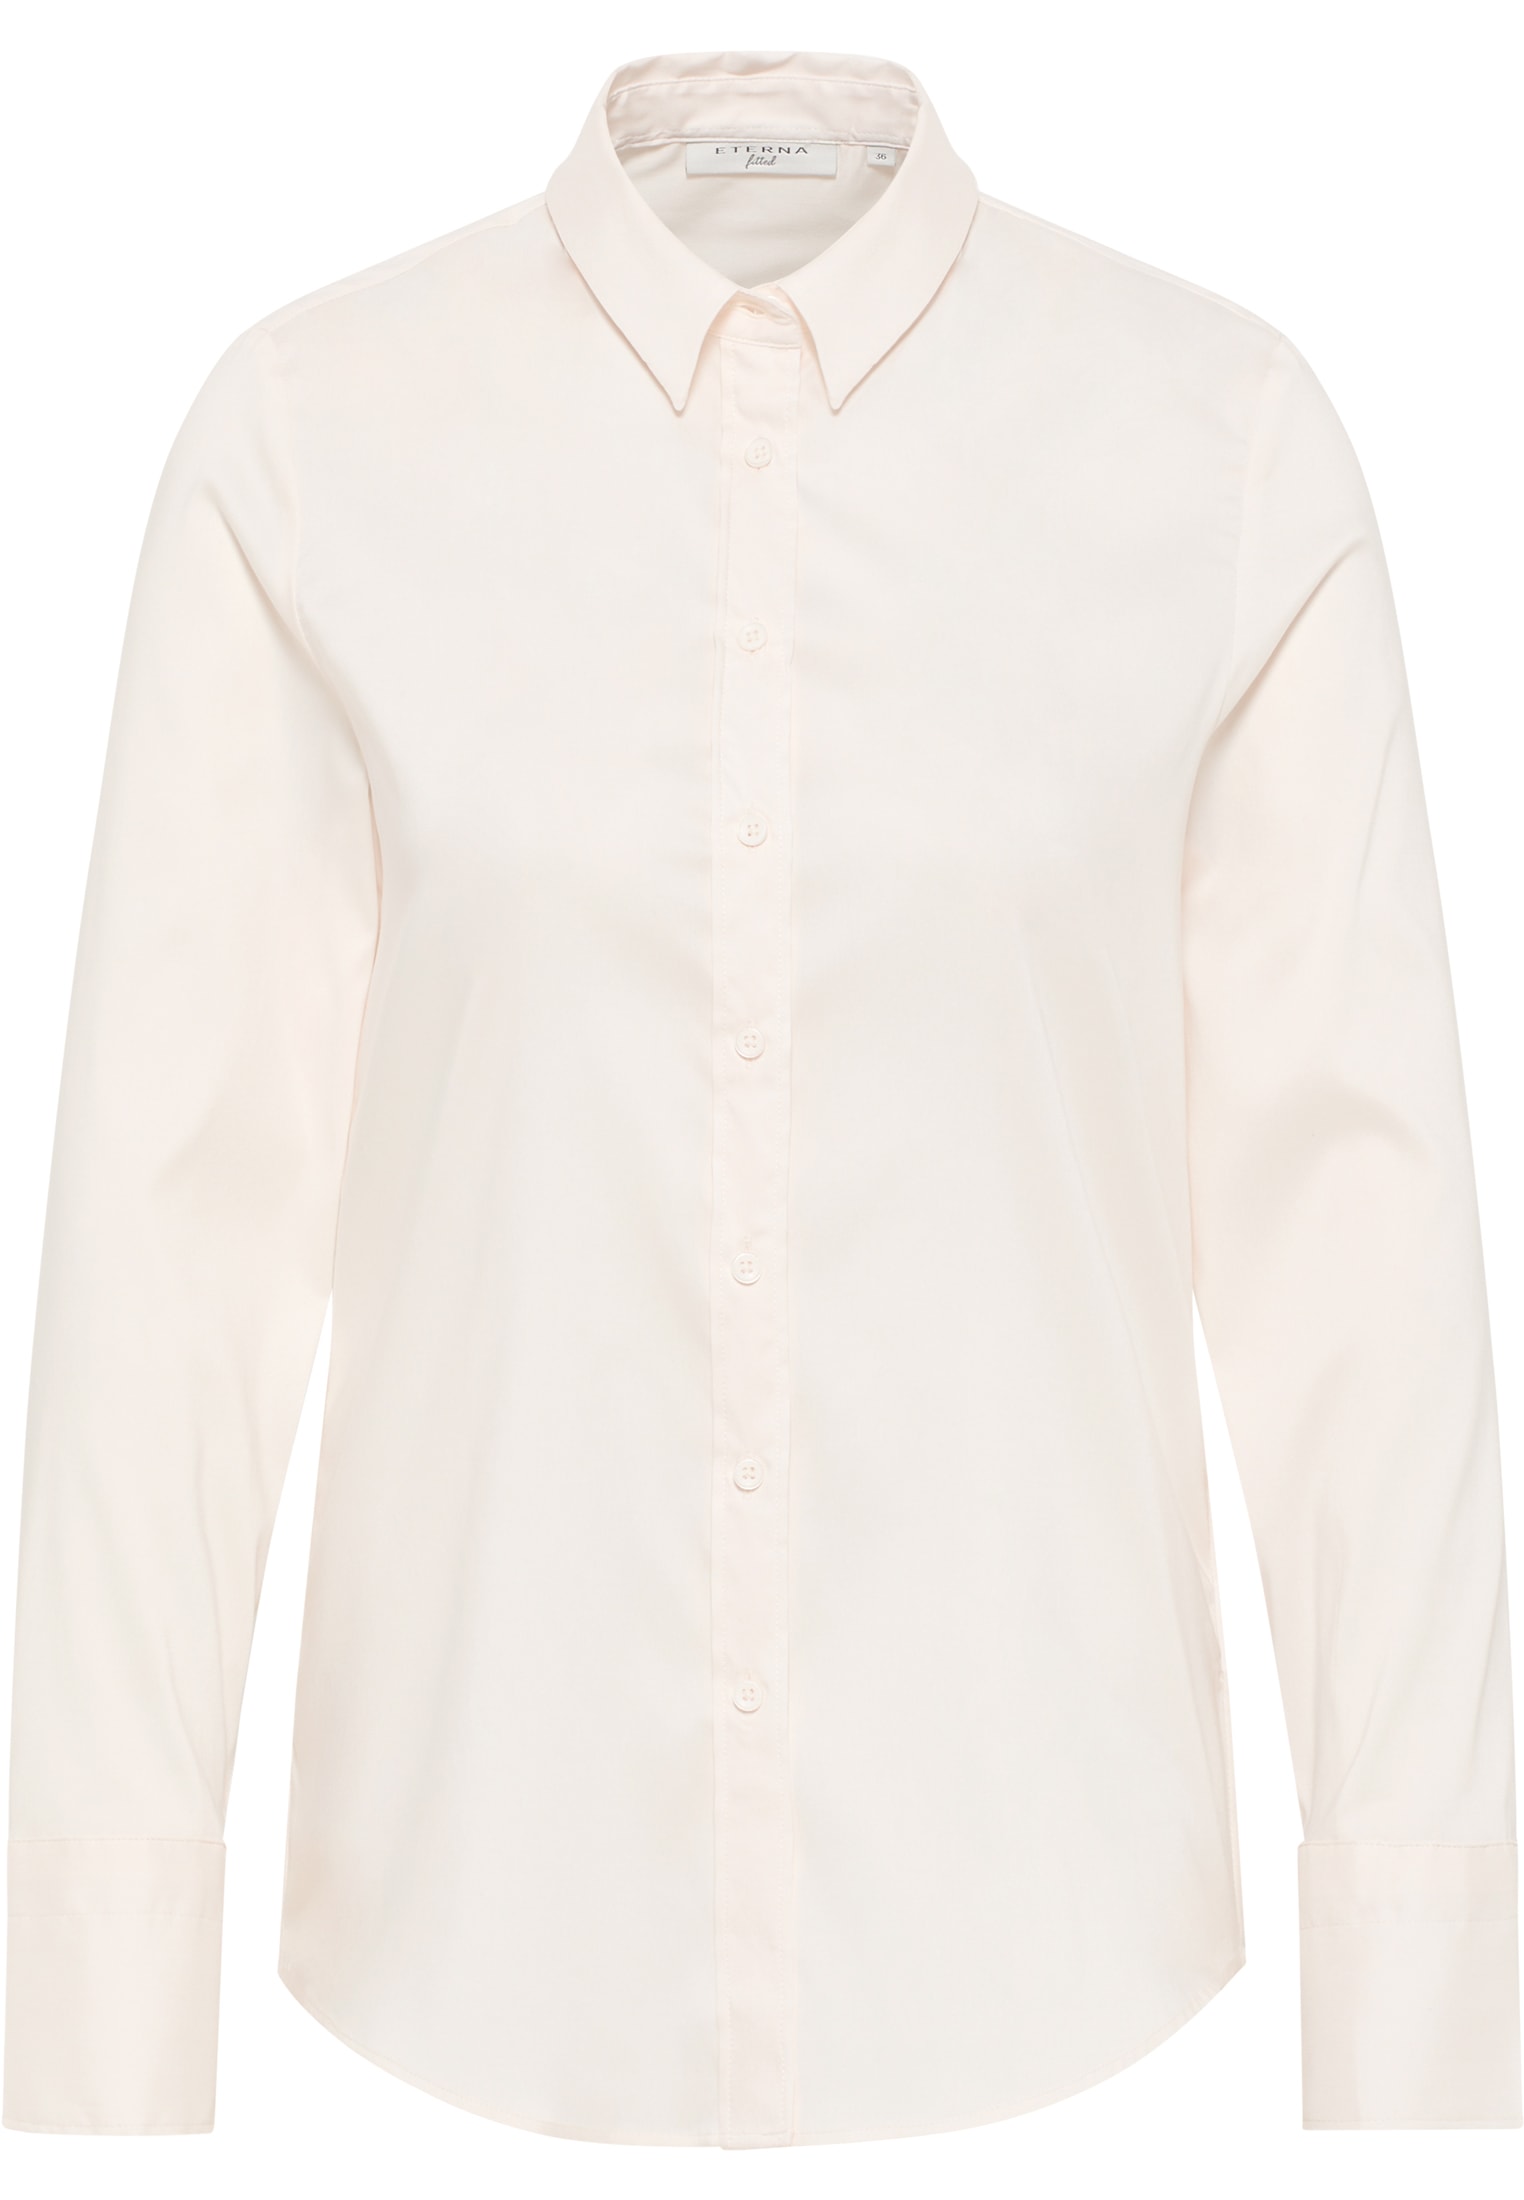 Bluse | unifarben 38 | off-white Performance | 2BL00441-00-02-38-1/1 | off-white in Langarm Shirt